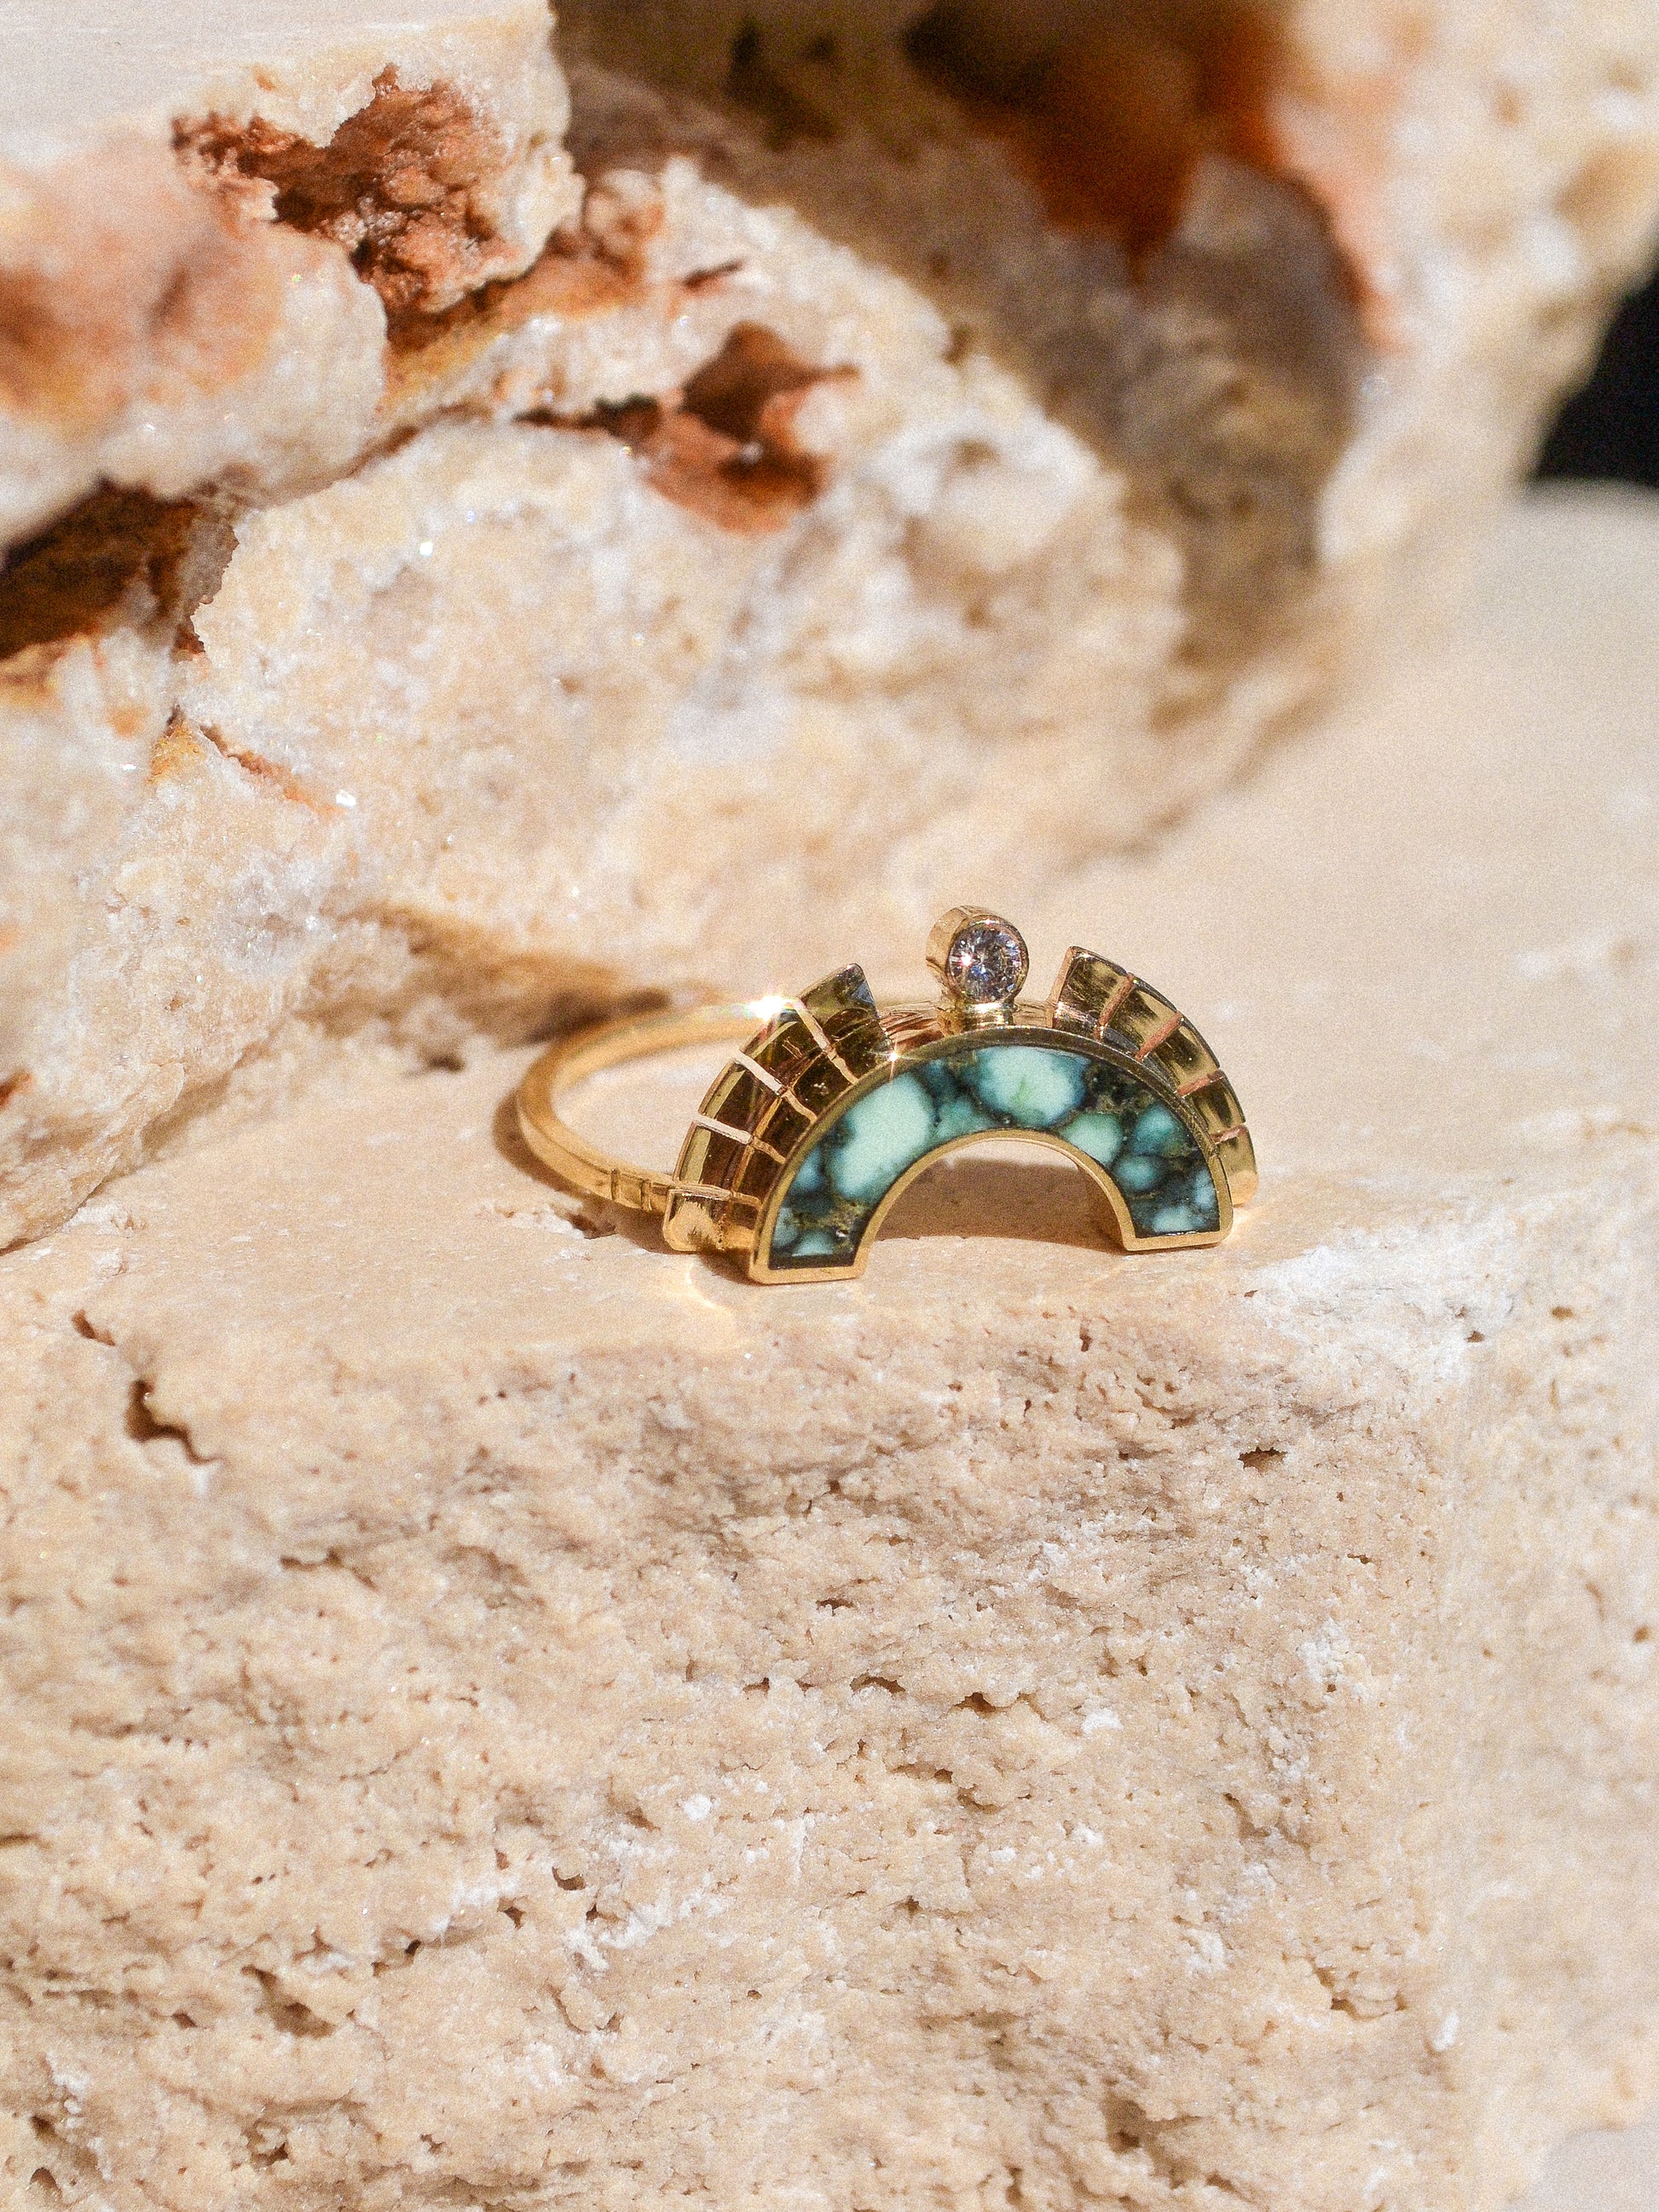 RISING SOL ARCH CROWN / The inlaid Angel Wing variscite is hand cut and shaped to fit perfectly inside this 14K gold bezel. A Young in the Mountain signature carved halo features a .03 ct conflict-free white diamond that brings beautiful light to this piece.